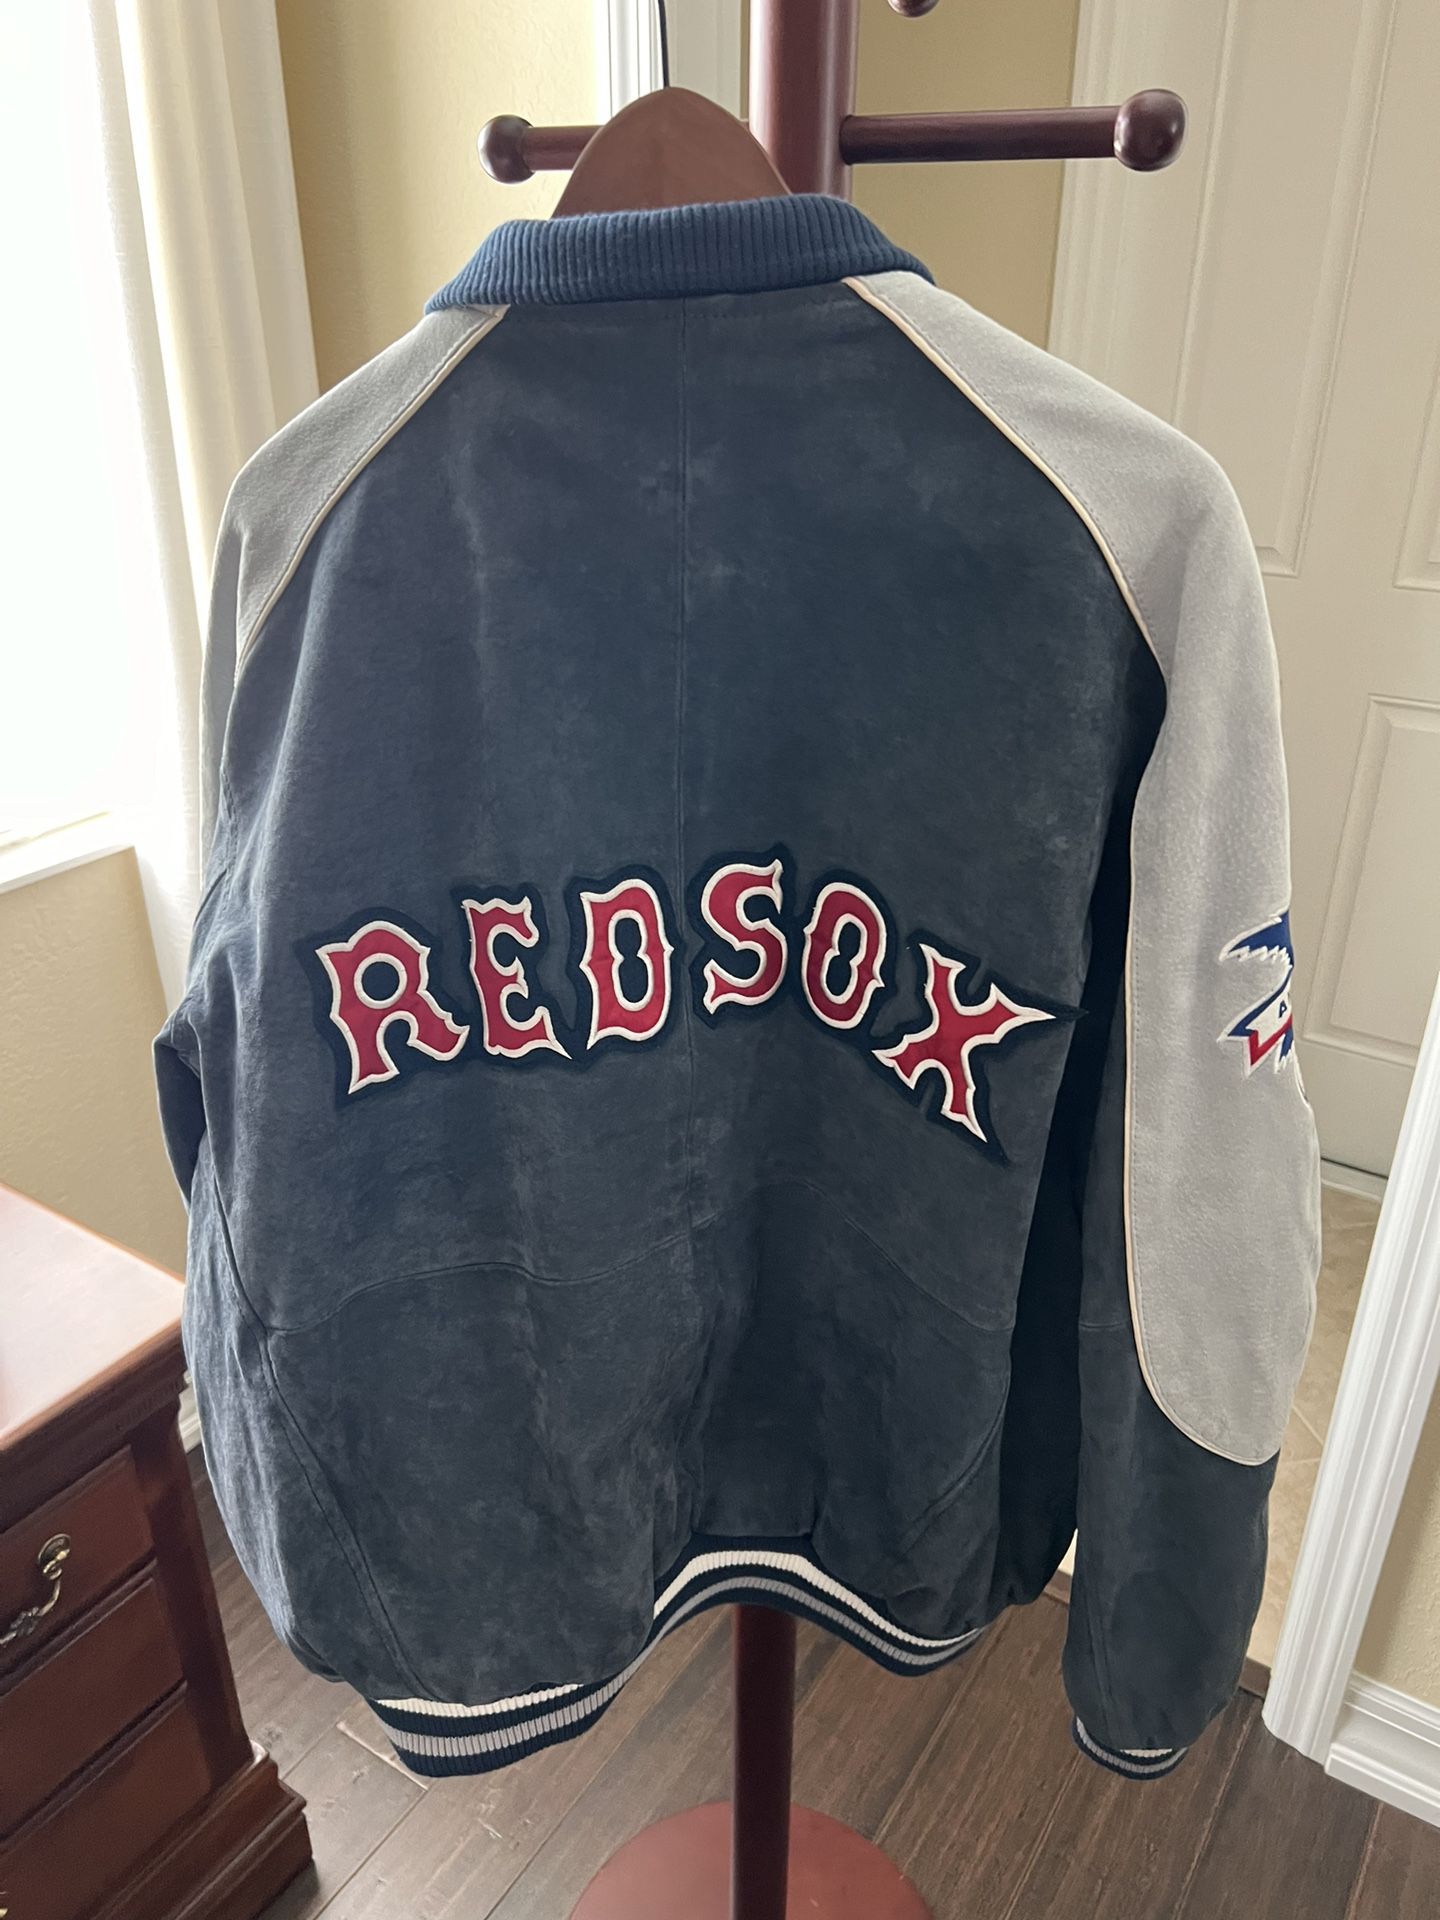 Official Red Sox Jacket